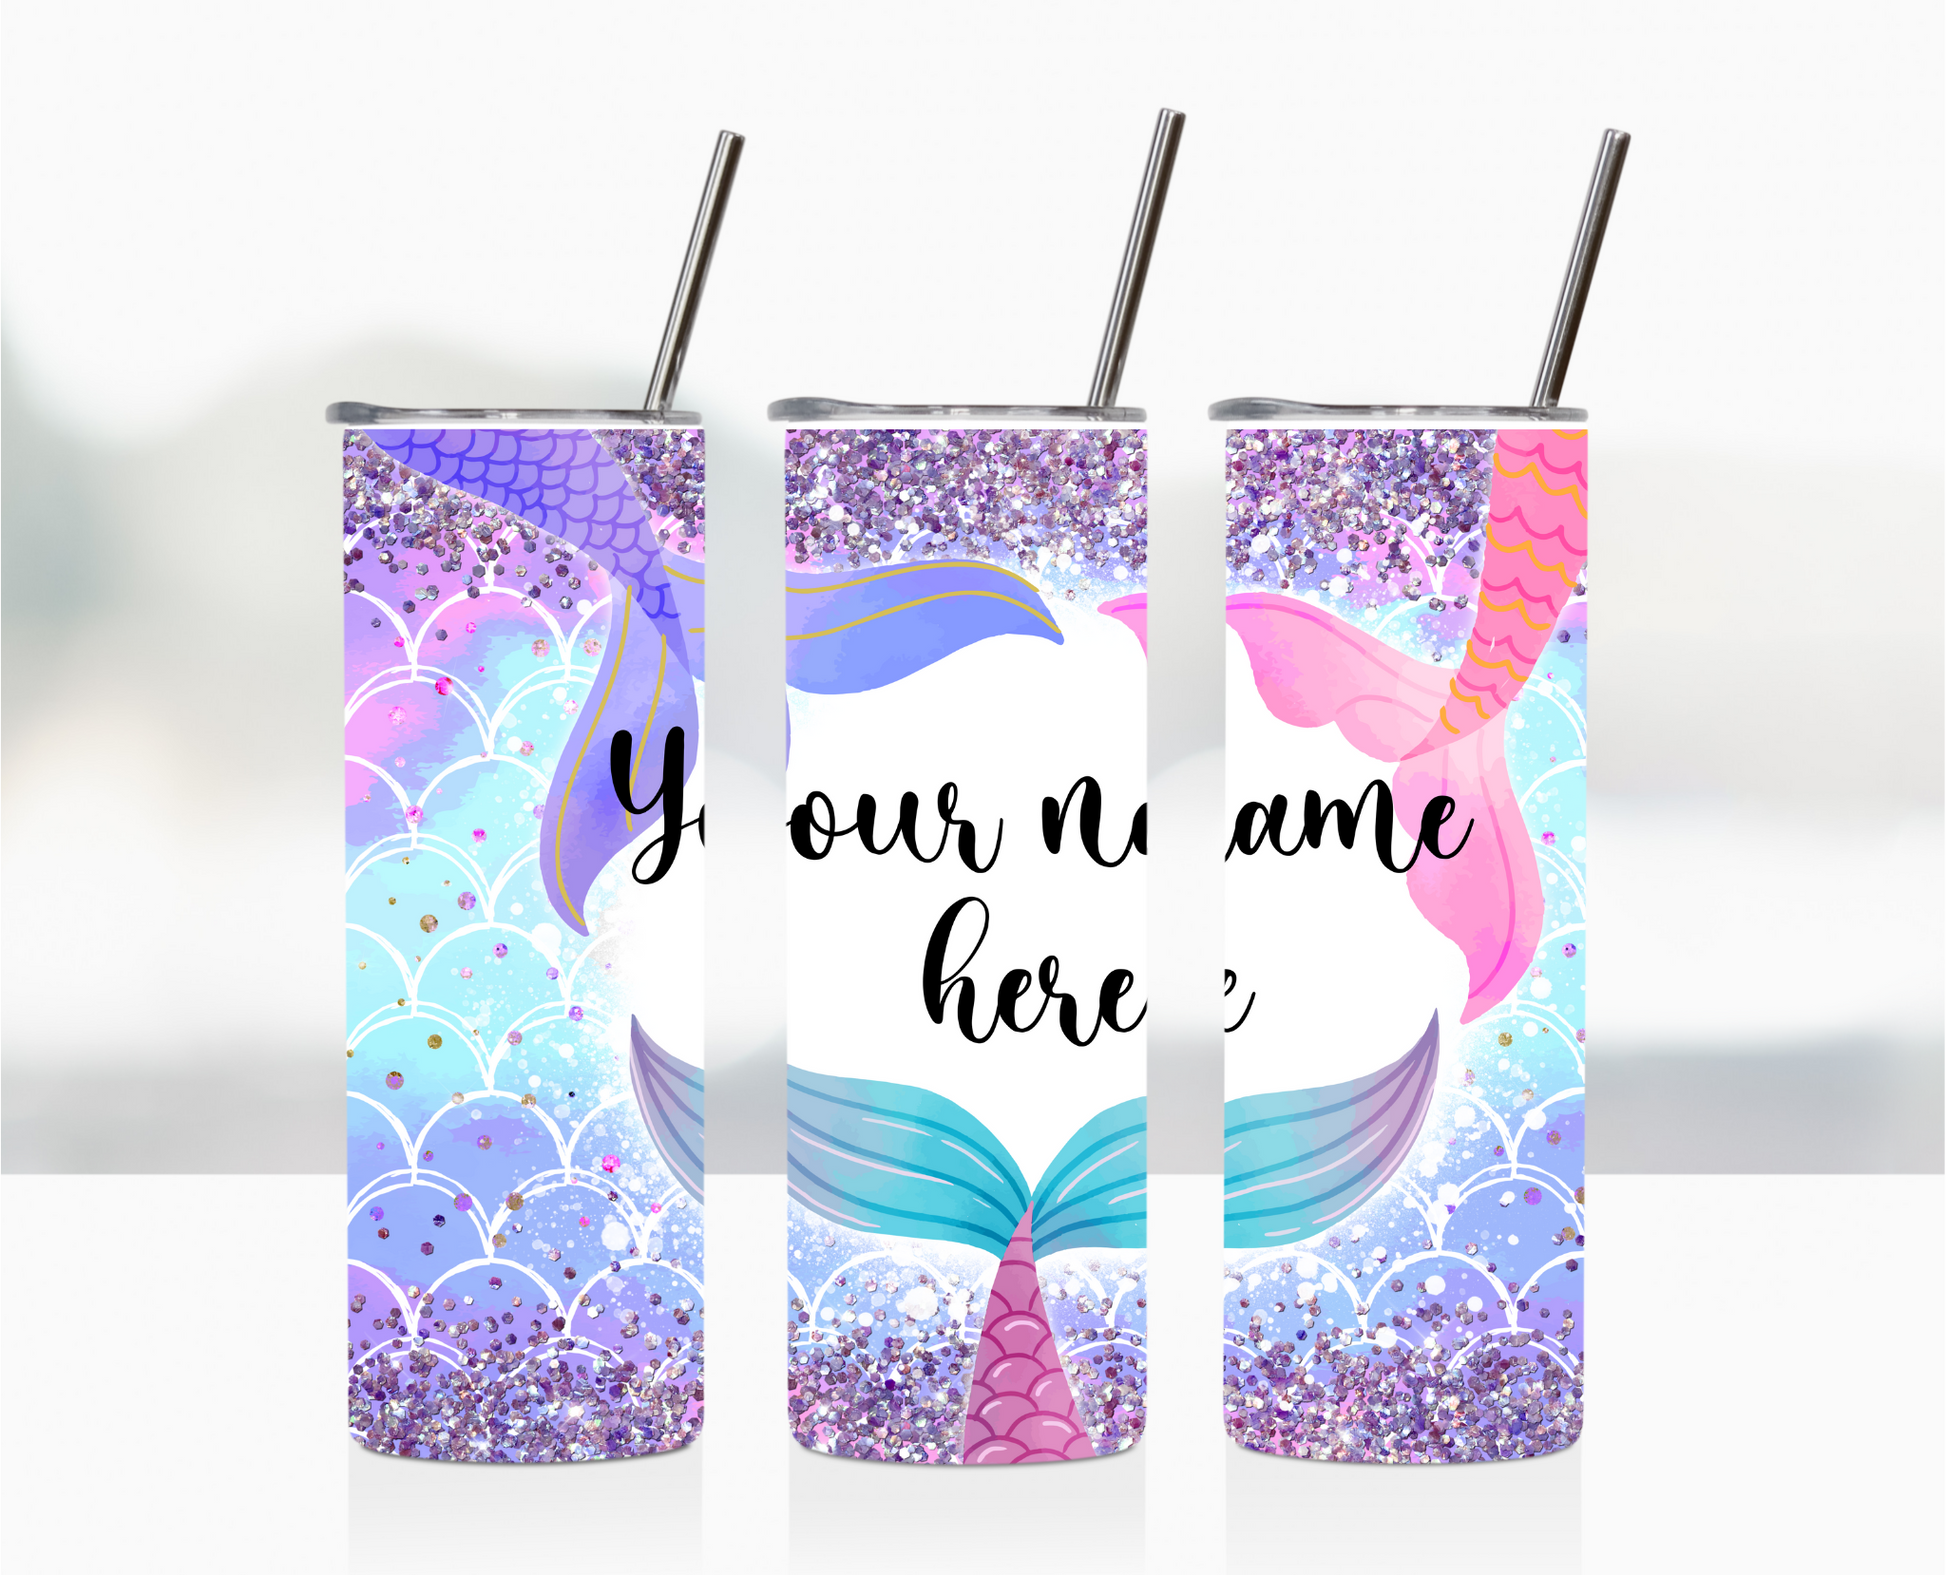 Mermaid insulated customizable tumbler, mermaid personalized tumbler, personalized stainless steel tumbler.